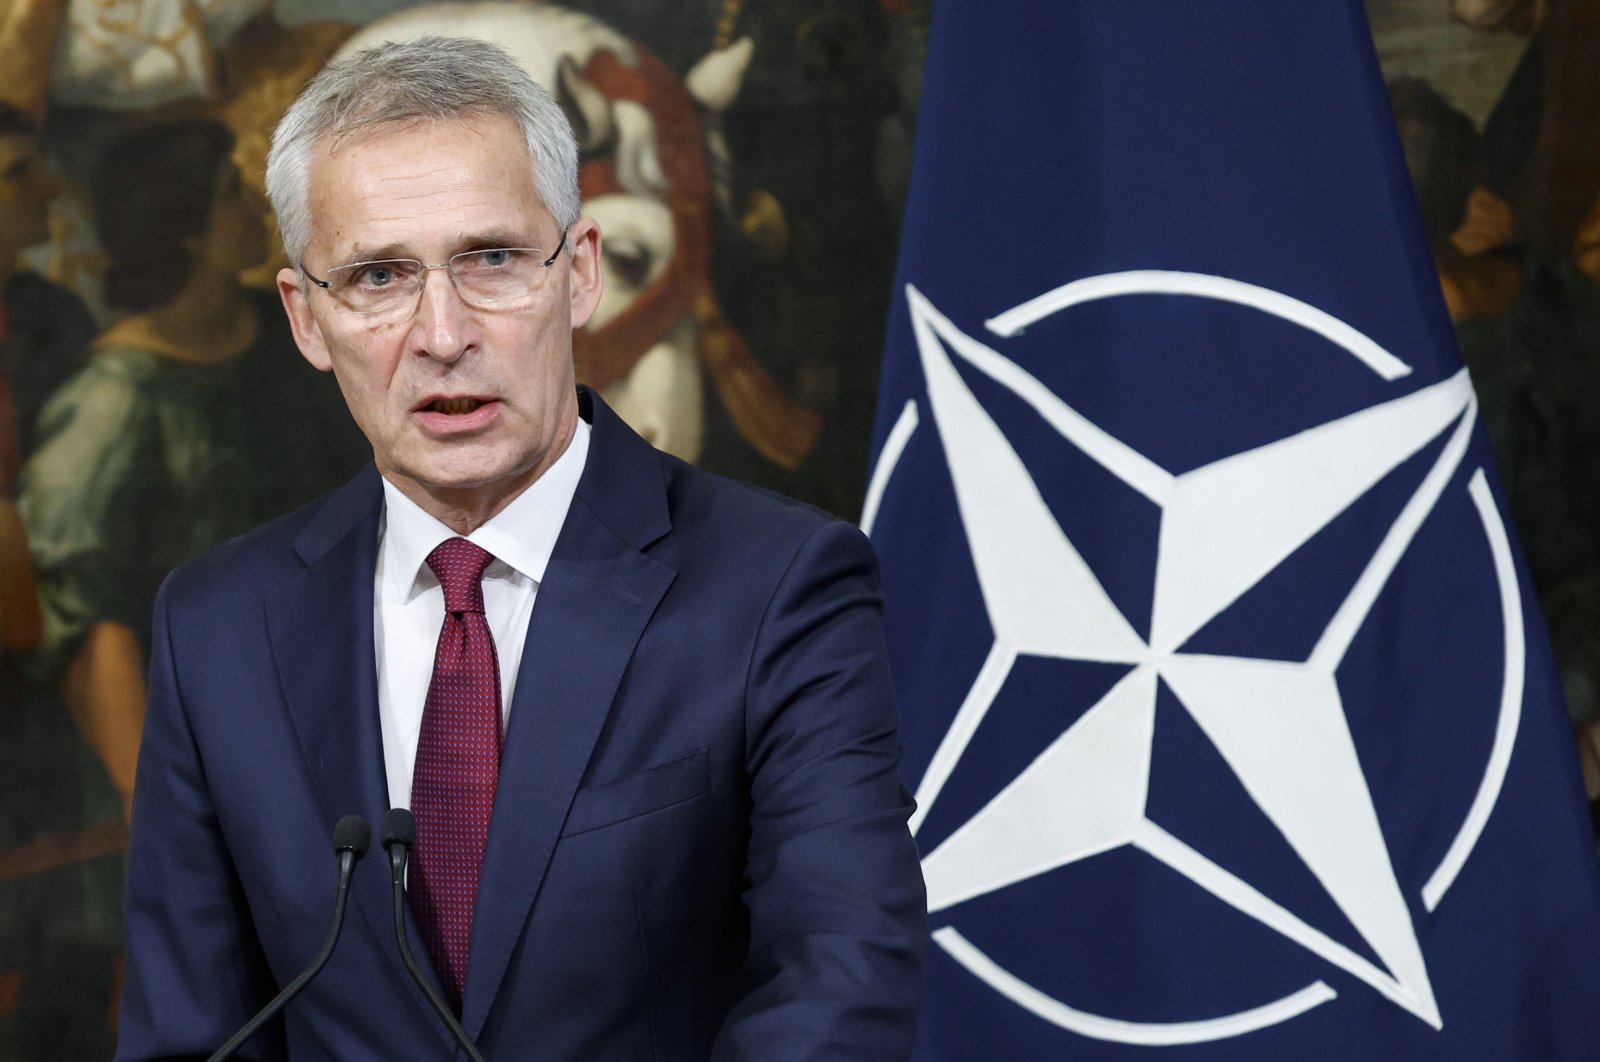 NATO Secretary-General Jens Stoltenberg during a joint press conference with Italian Prime Minister Meloni following their meeting at Chigi Palace in Rome, Italy, Nov. 10, 2022.  (EPA Photo)